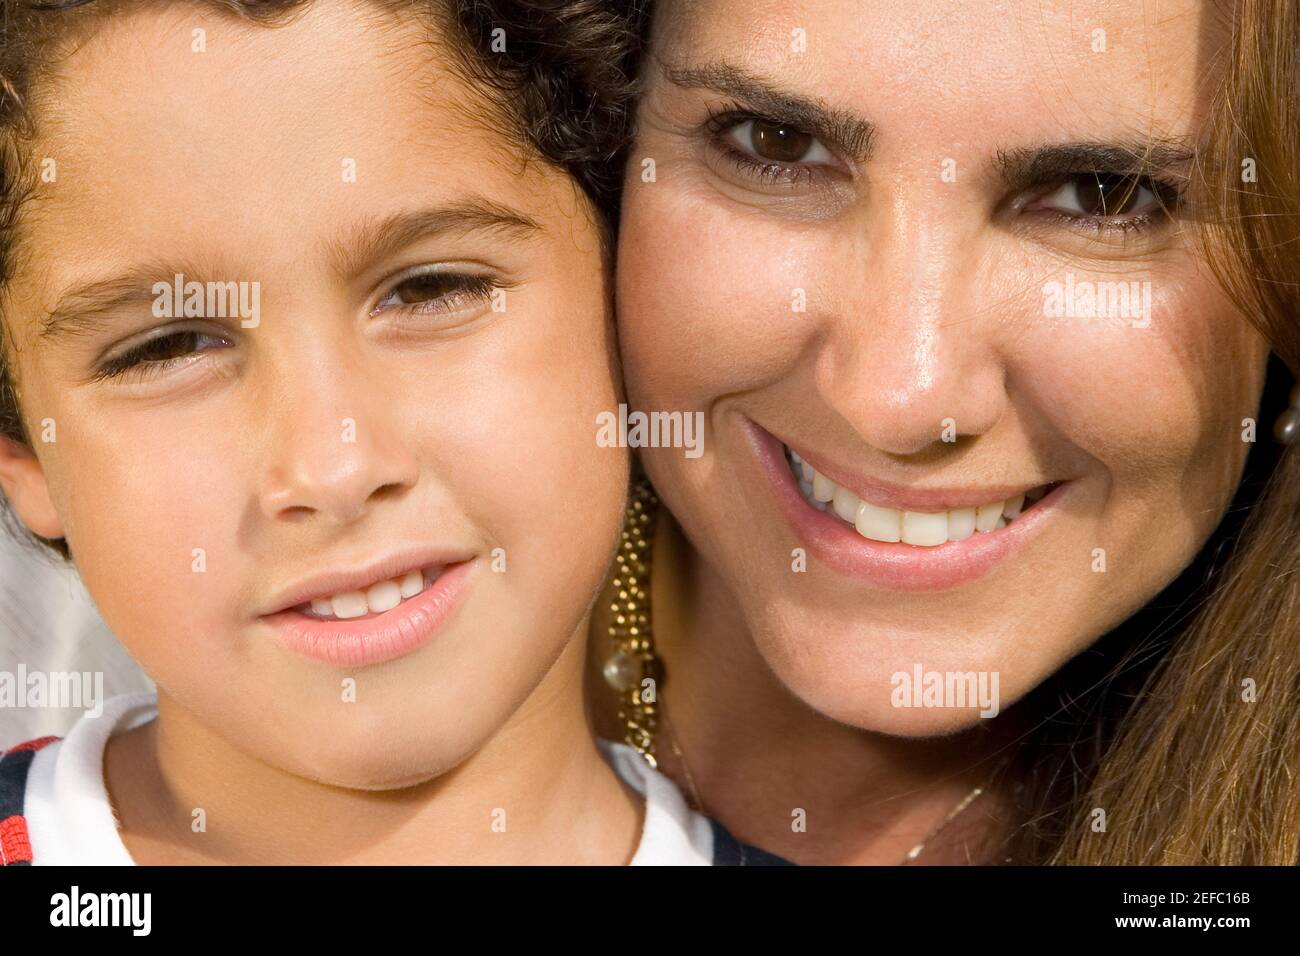 Portrait of a mid adult woman and her son smiling Stock Photo